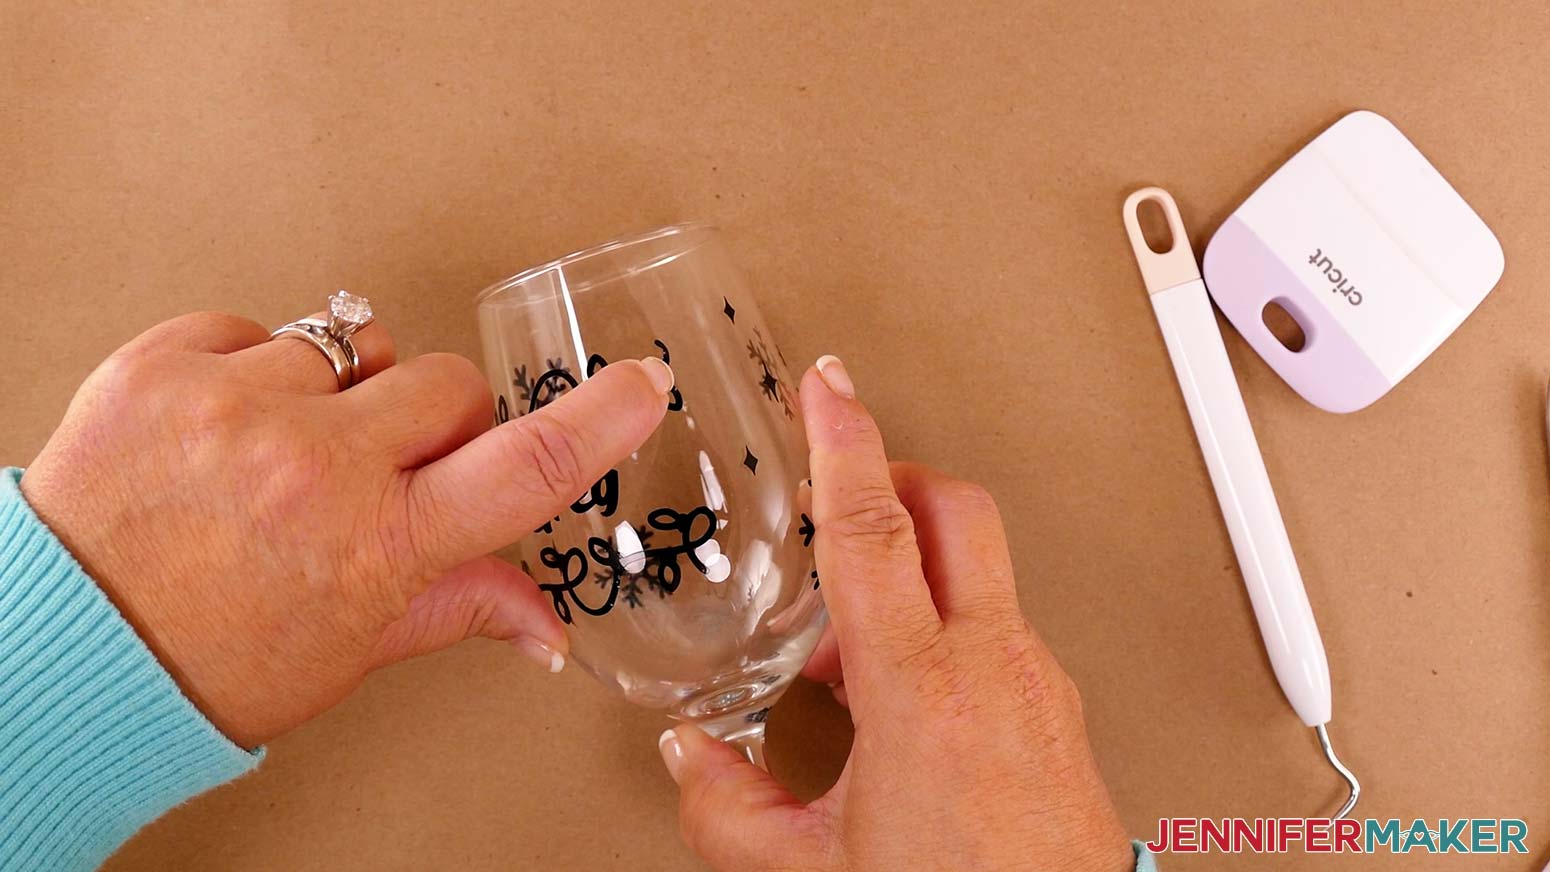 Press the vinyl stencil onto your wine glass really well with your fingers before applying etching cream to prevent the cream from seeping underneath. If you're not wearing gloves, be sure to clean your glass with rubbing alcohol after you're done.